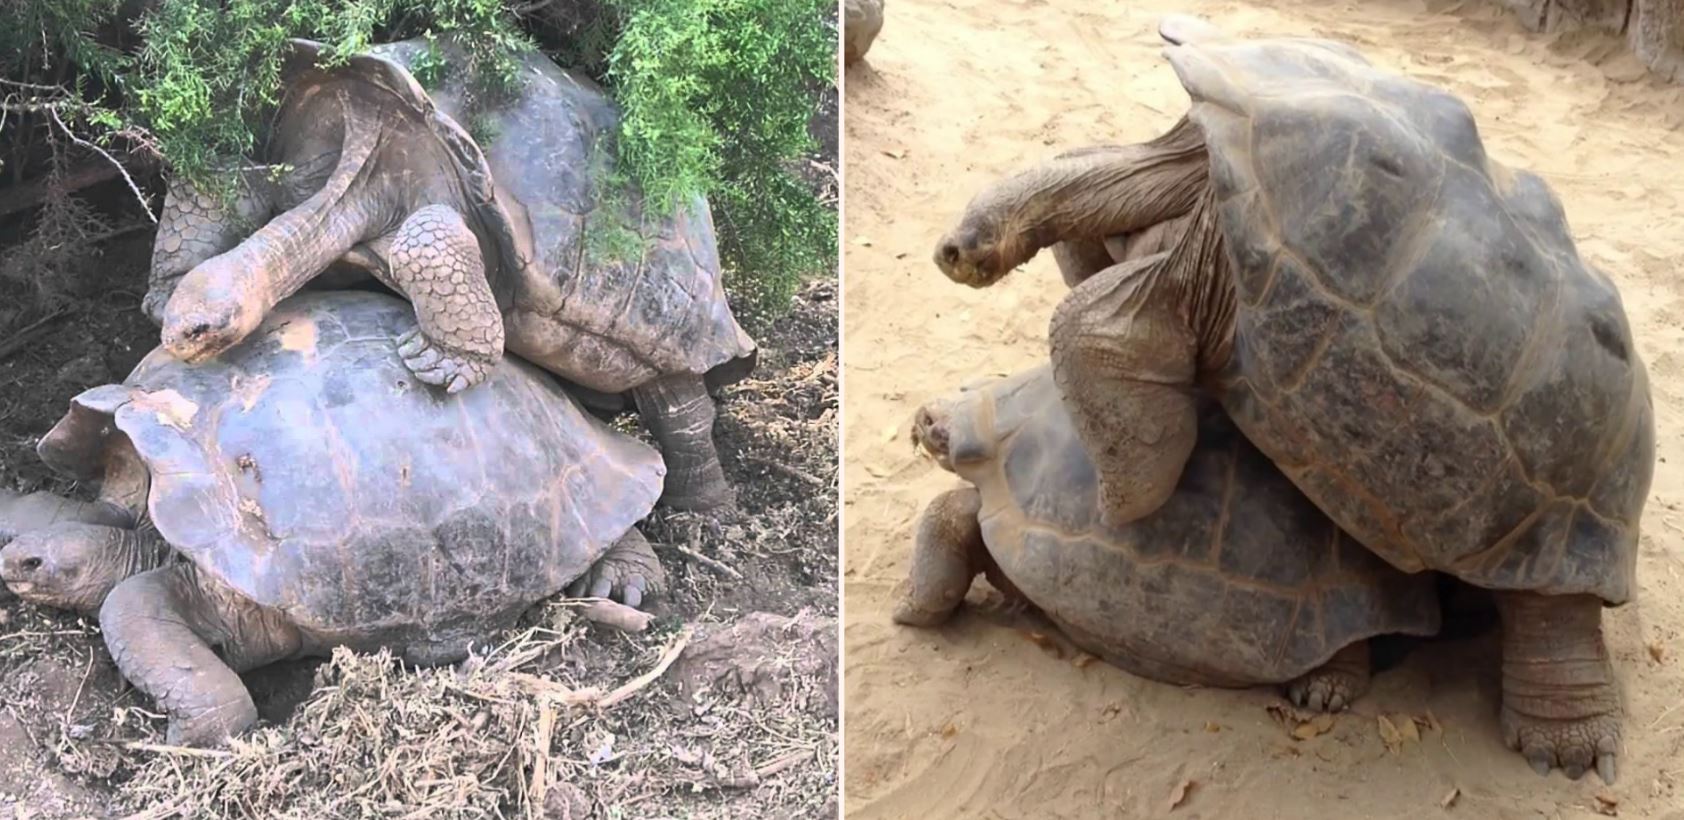 Diego the randy tortoise has f**ked so much he’s single-handedly saved his entire species